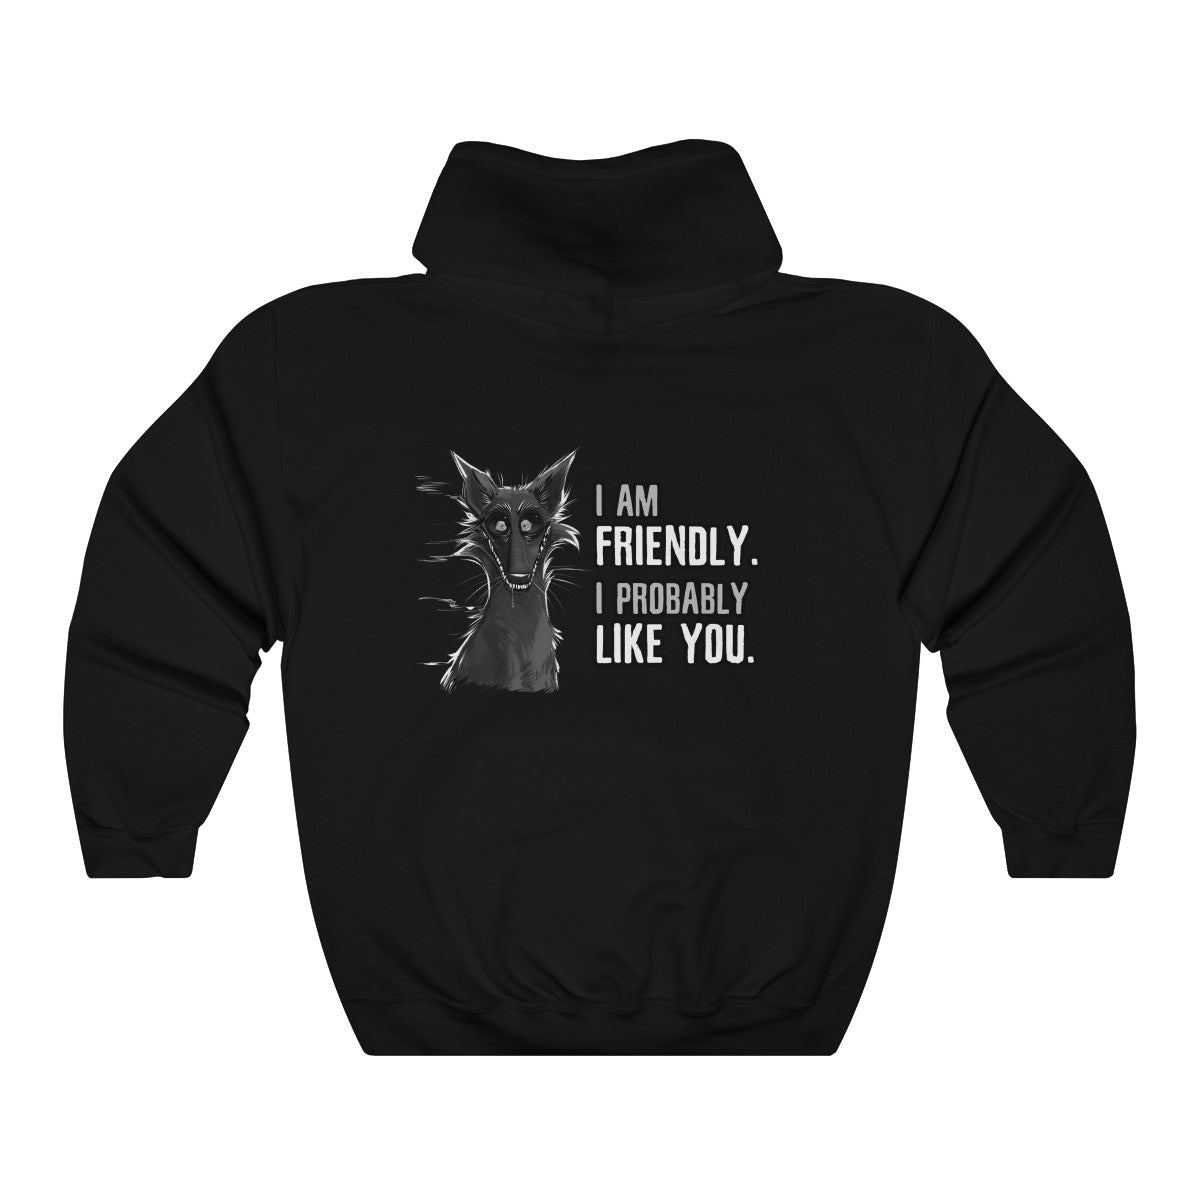 I probably DON'T hate you - Hoodie Hoodie Cyamallo Black S 